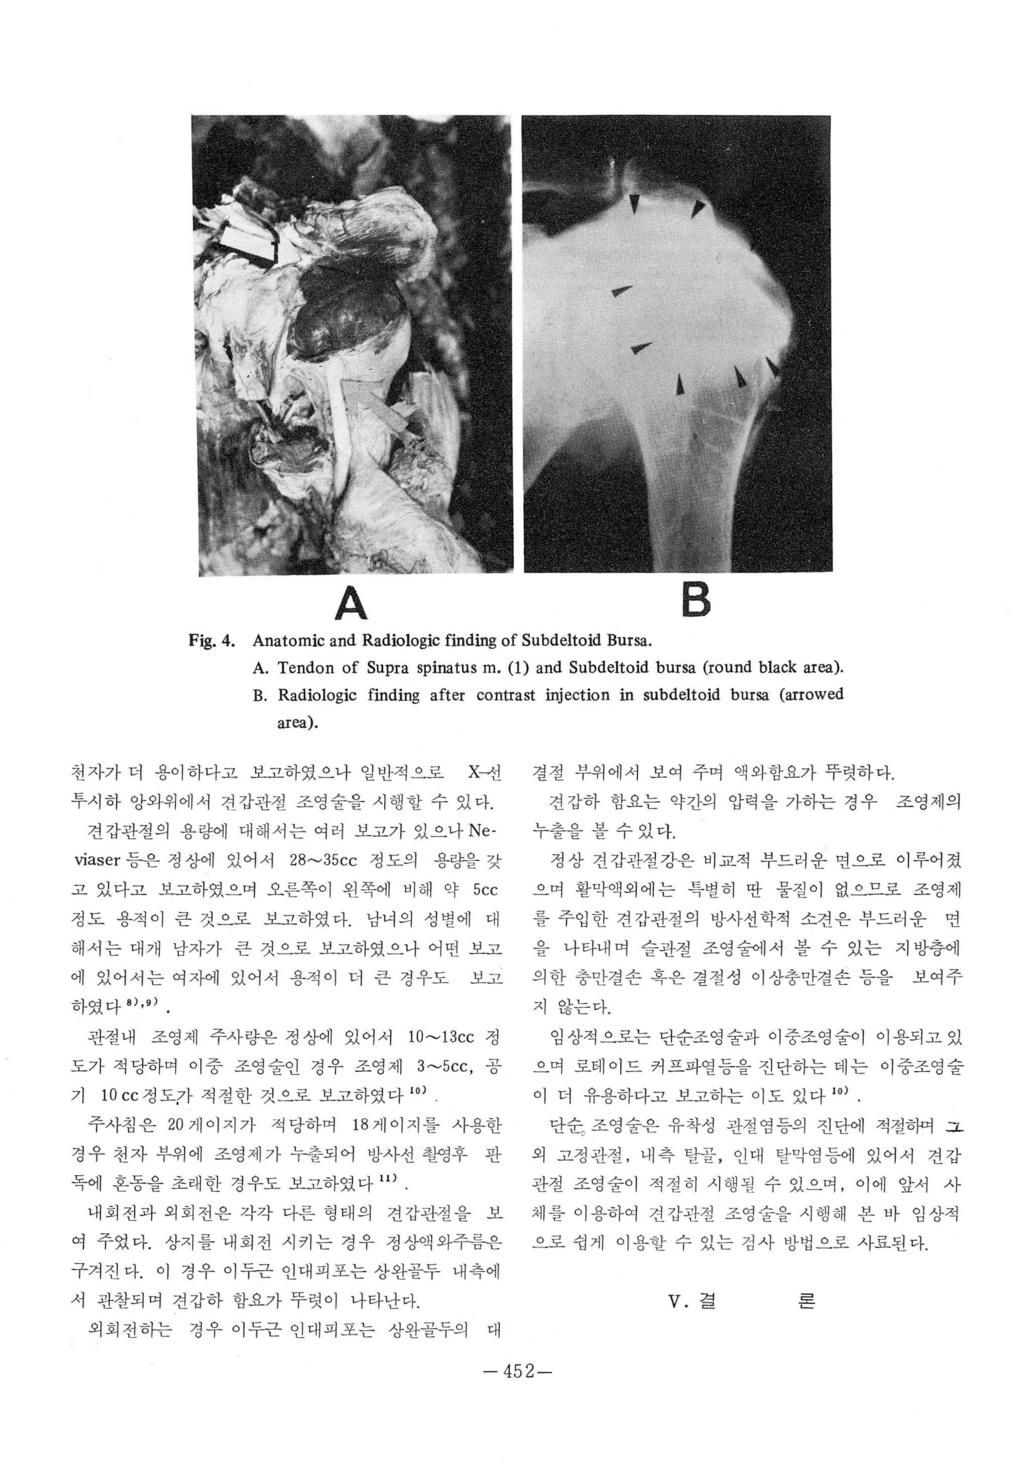 Fig. 4. A Anatomic and Radiologic finding of Subdeltoid Bursa. B A. Tendon of Supra spinatus m. (1) and Subde1toid bursa (round black area). B. Radiologic finding aft er contrast inj ection in subde1toid bursa (arrowed area).